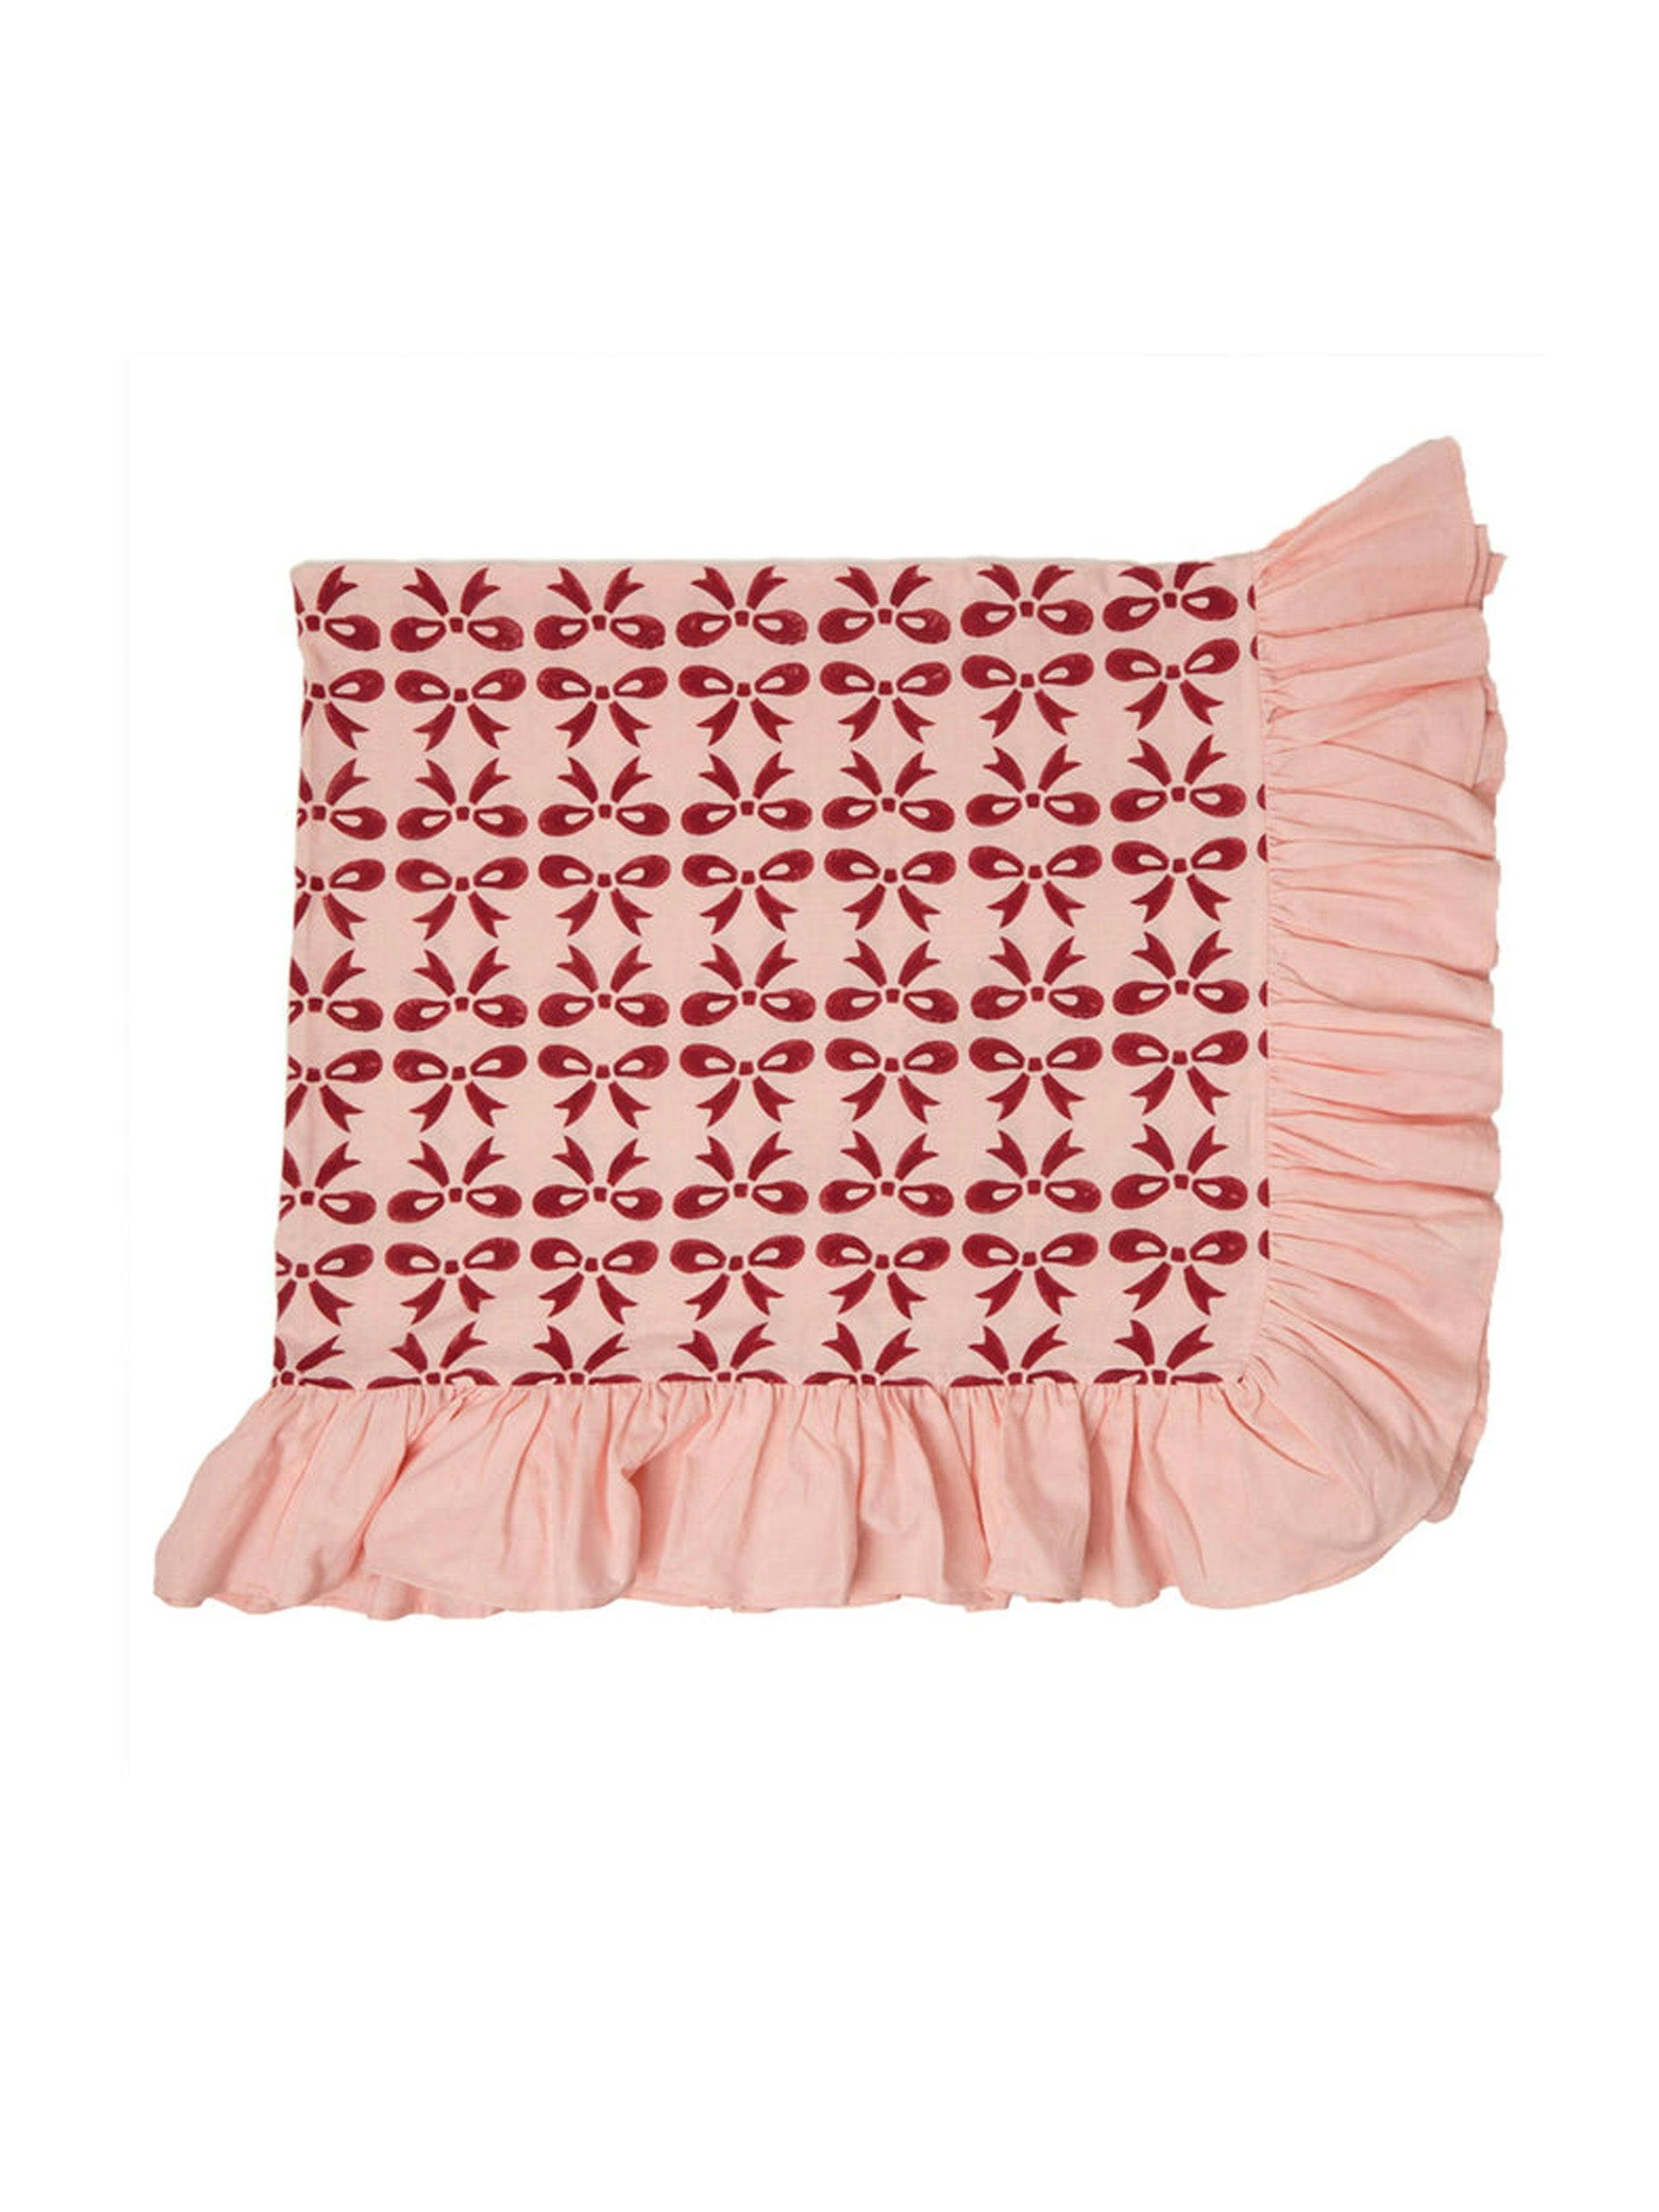 Frilled bow-print tablecloth in Burgundy Rose